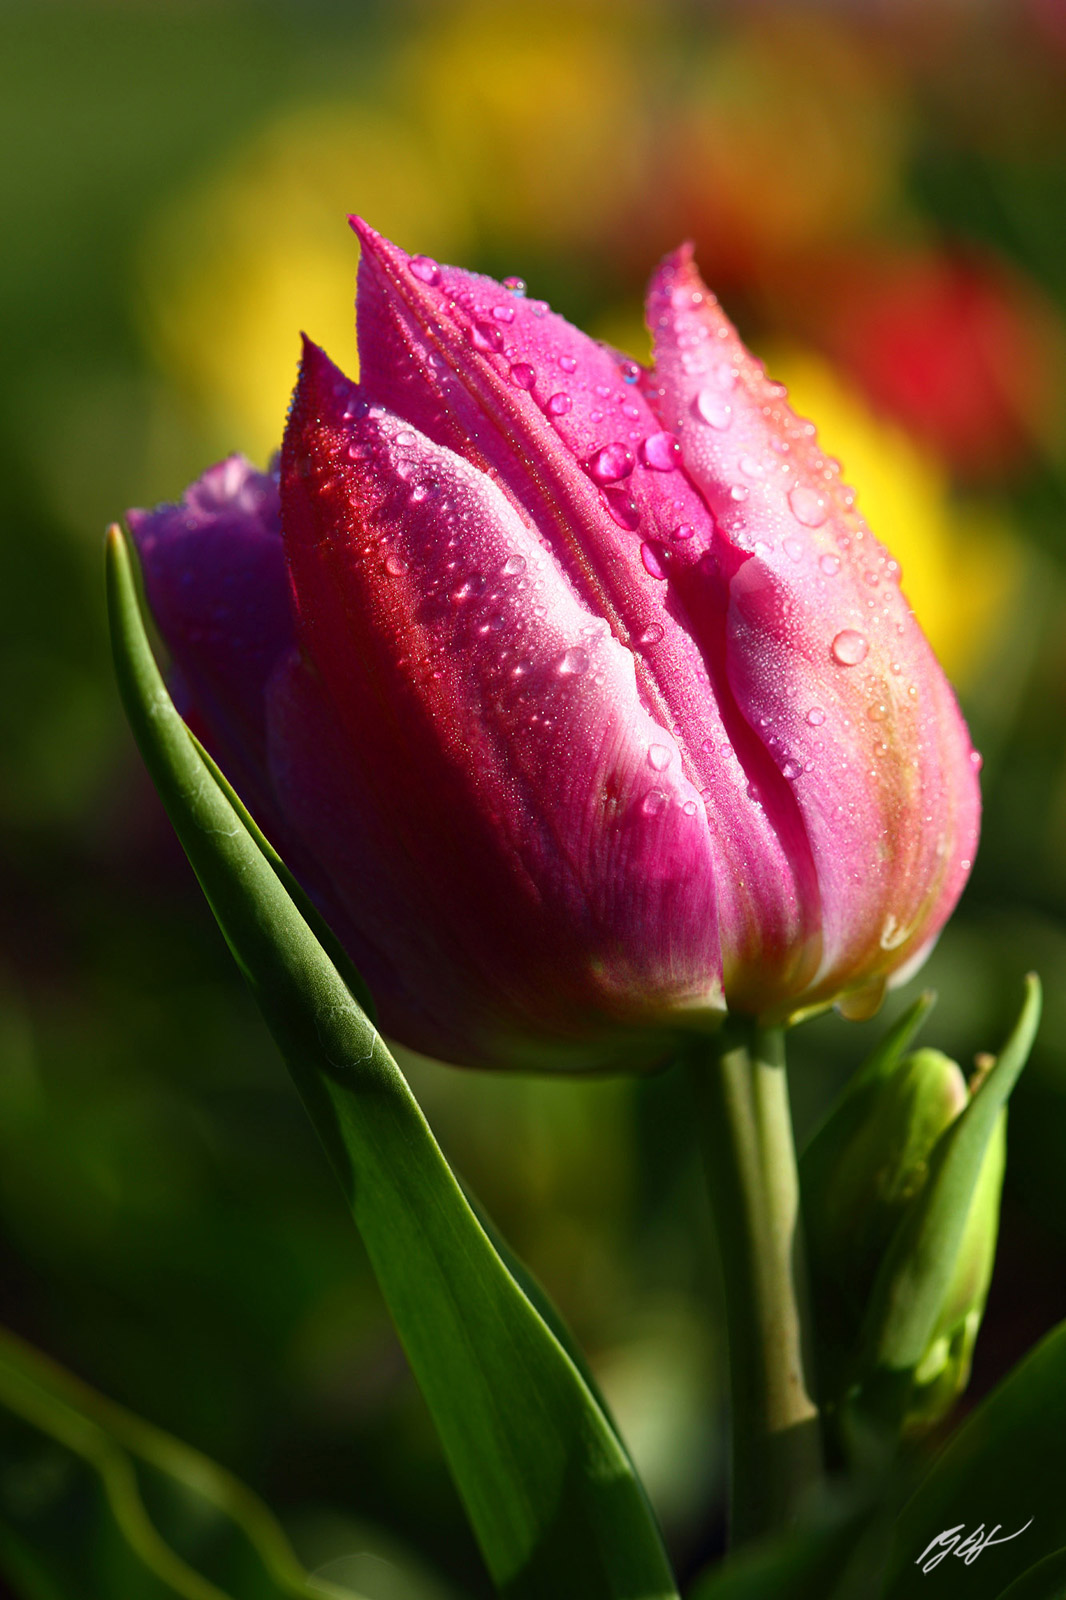 Pink Tulip and Rain Drops, C/O Roozengaarde from Skagit Valley in Washington